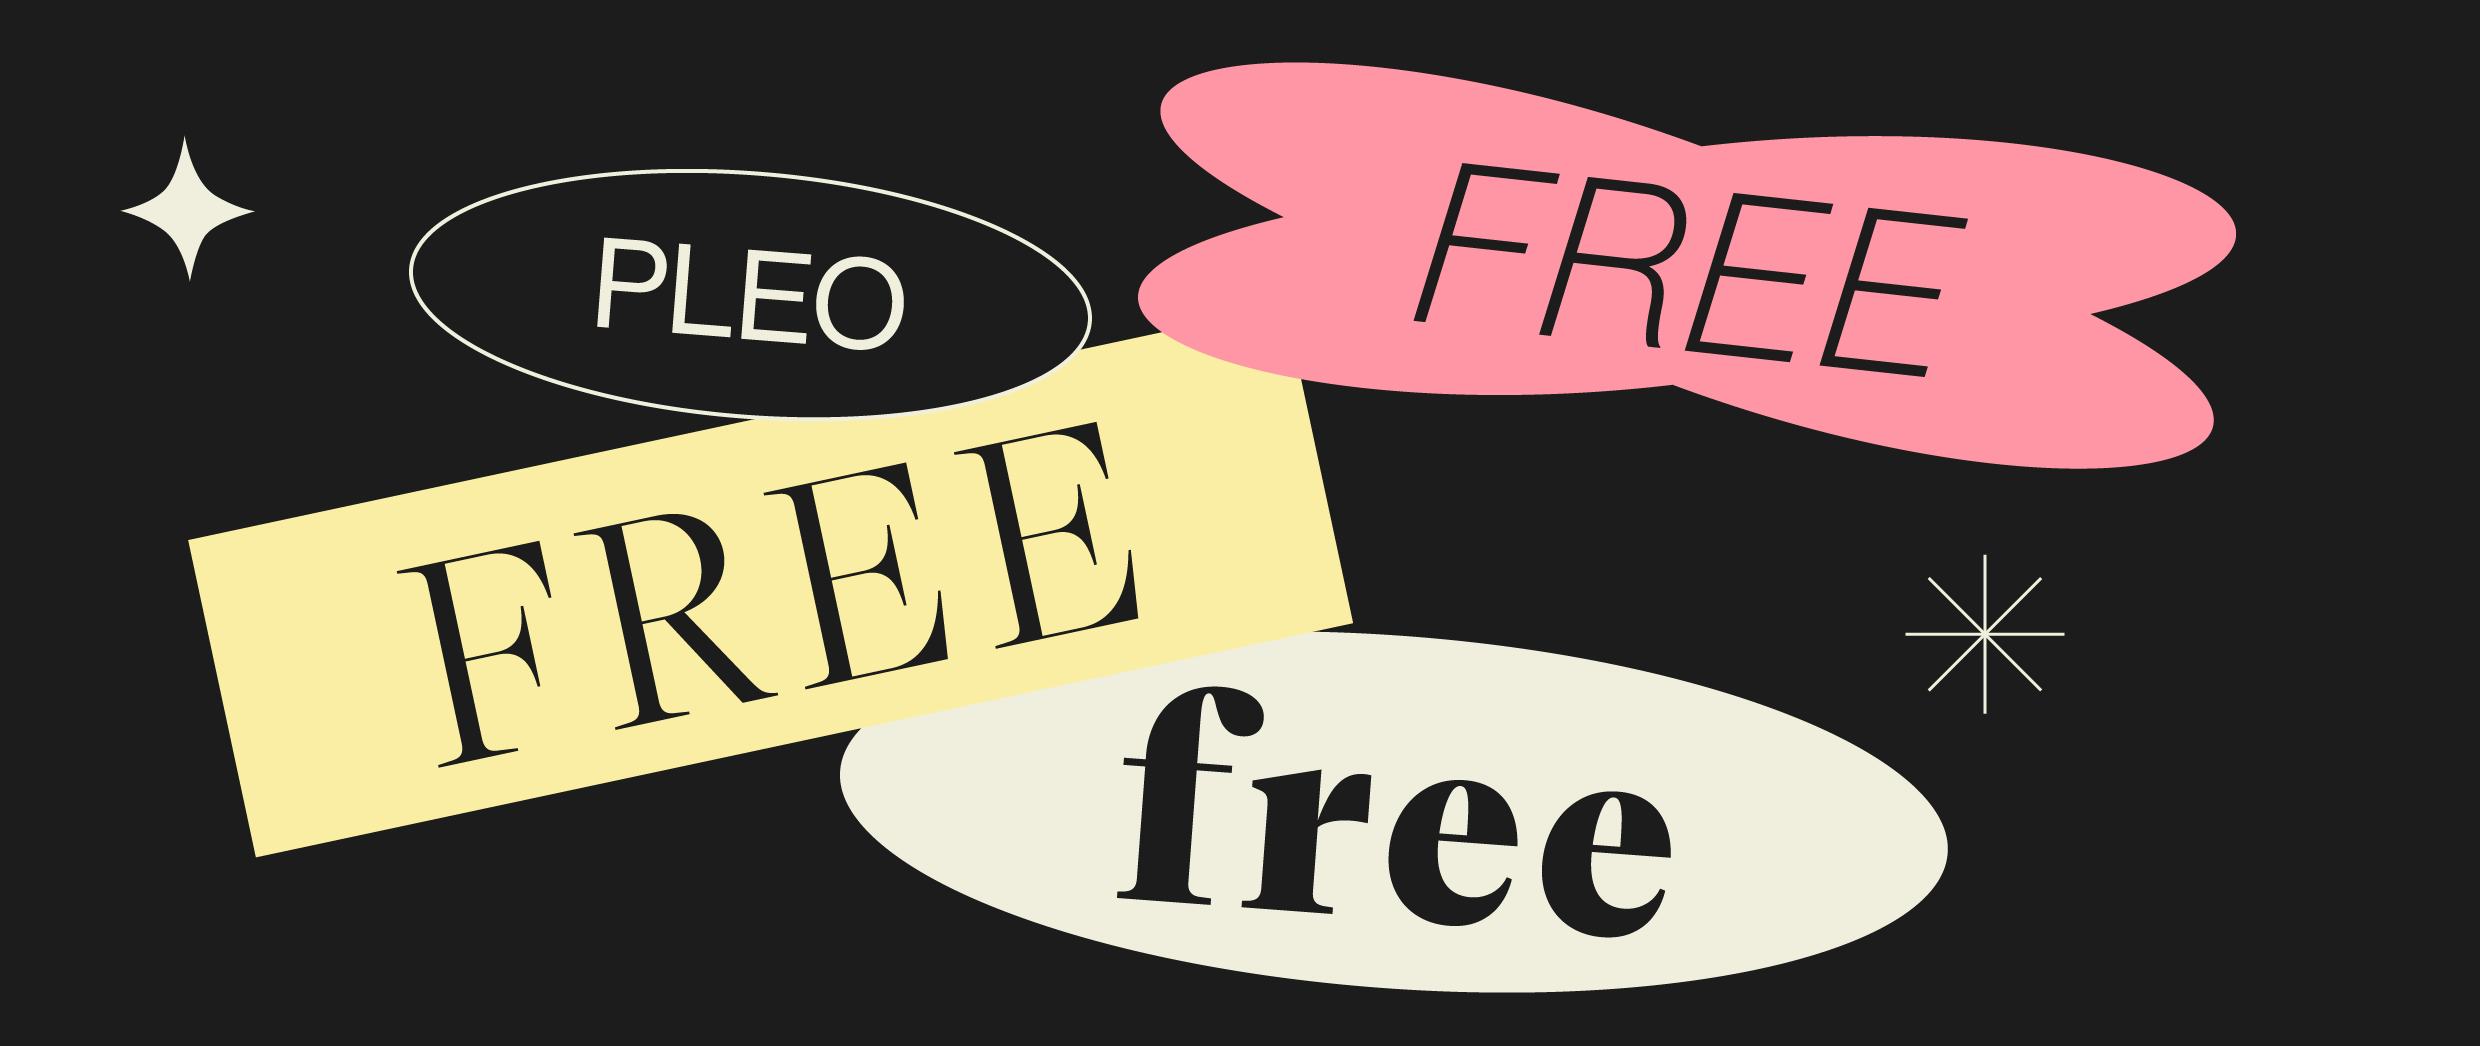 Banners for Pleo Free price plan